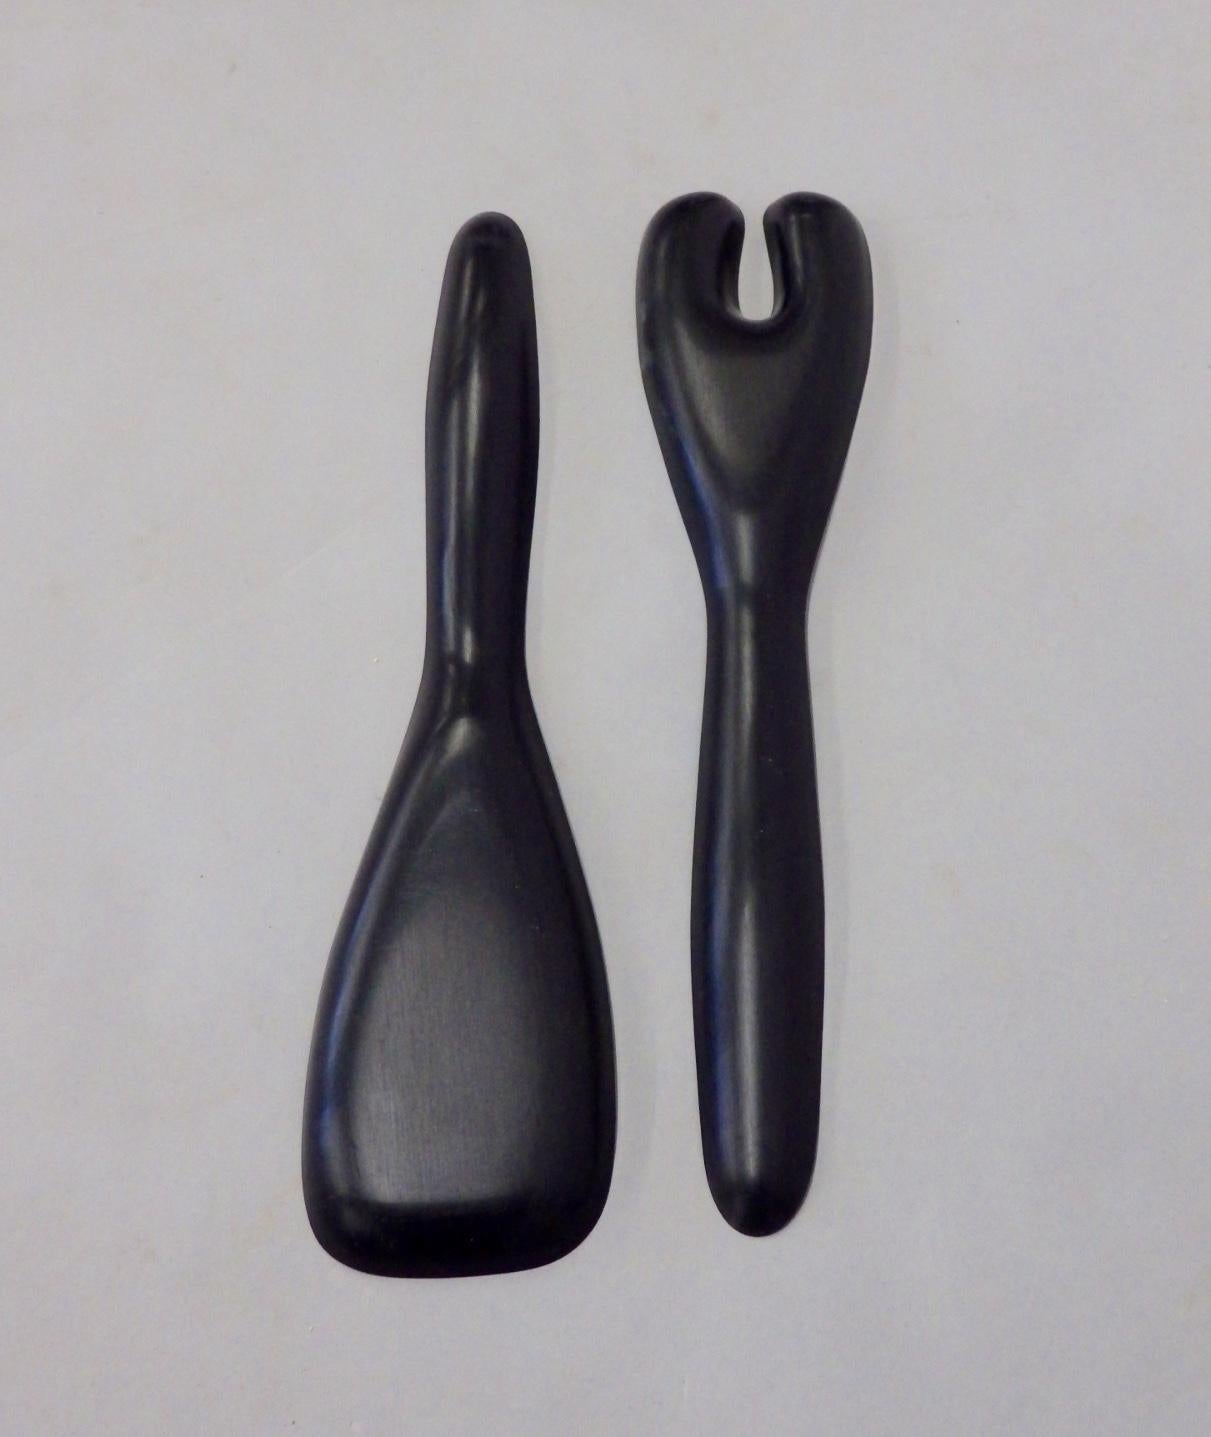 Large scale black plastic or acrylic modernist salad servers. Recently acquired as part of large collection.